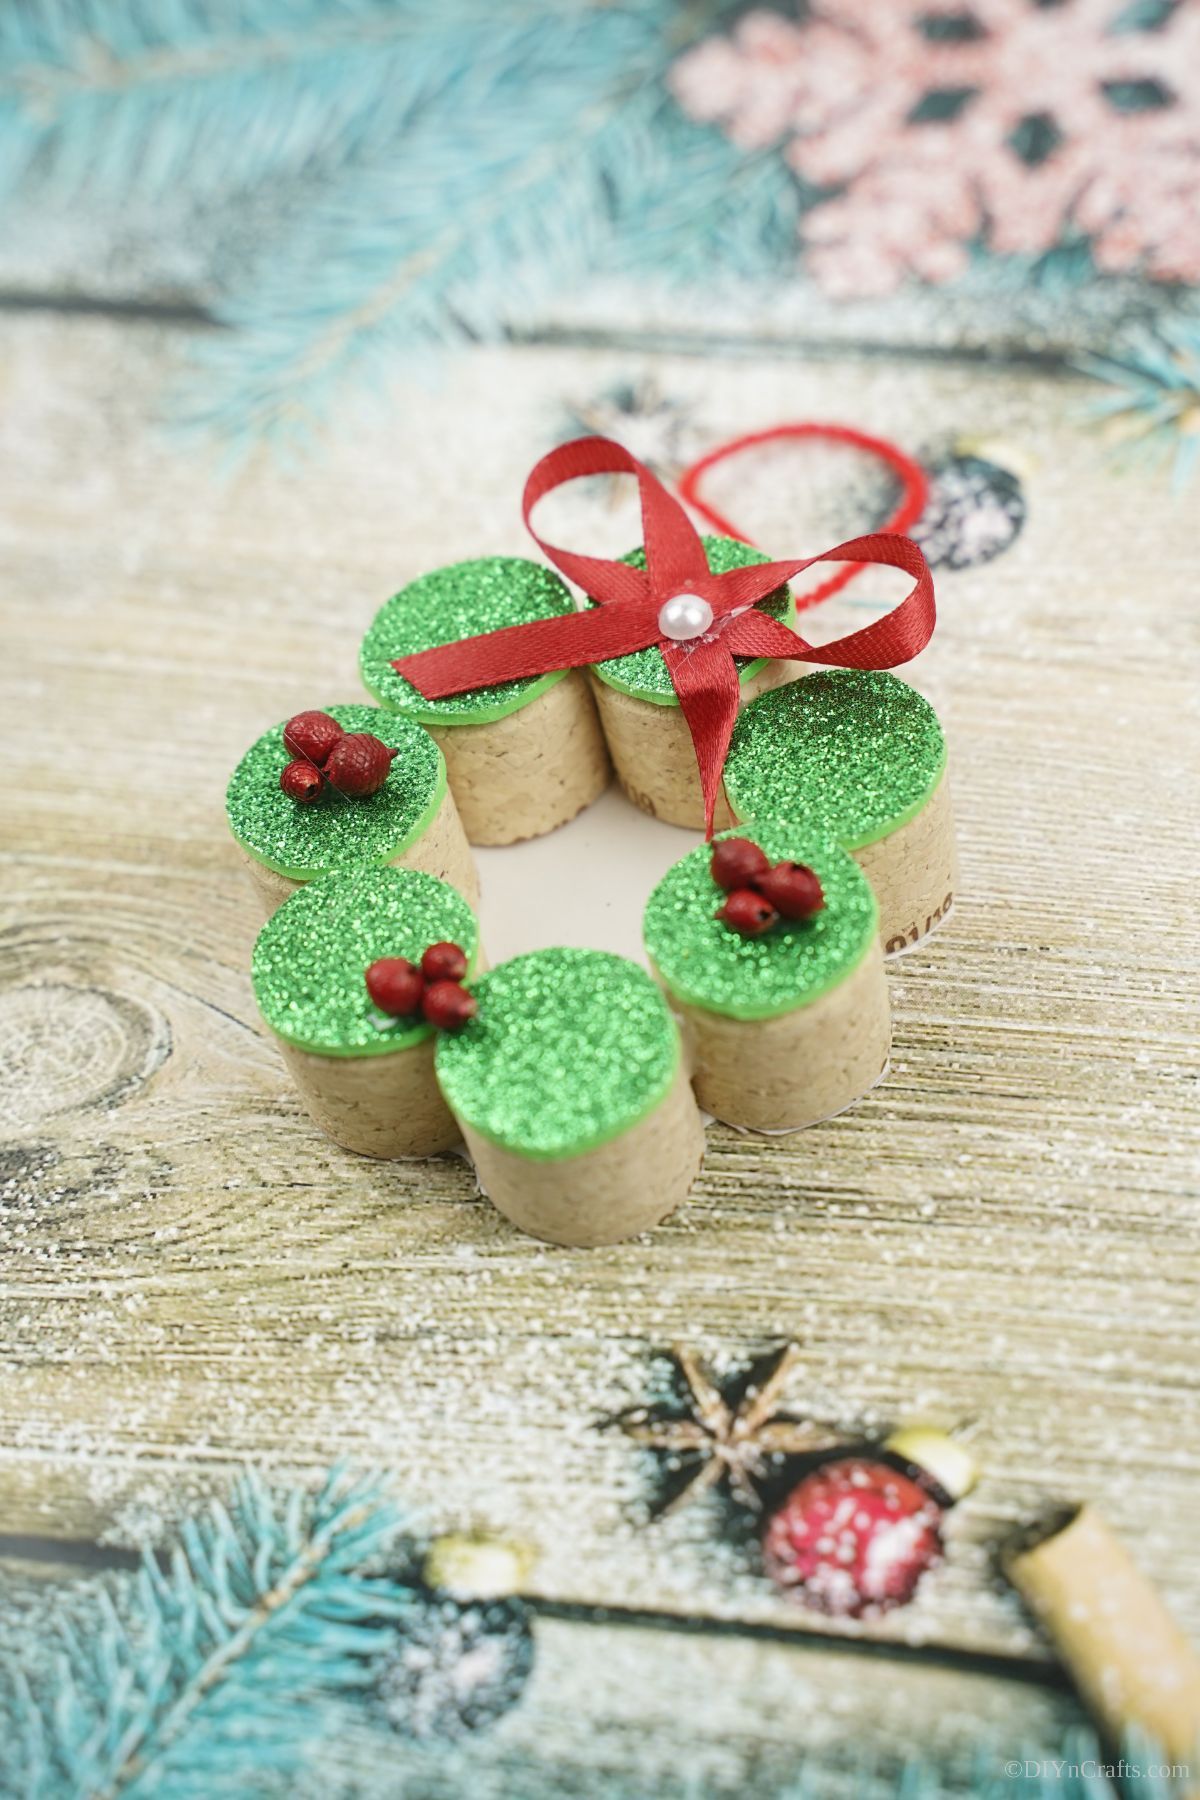 miniature cork wreath with green top on table with blue background